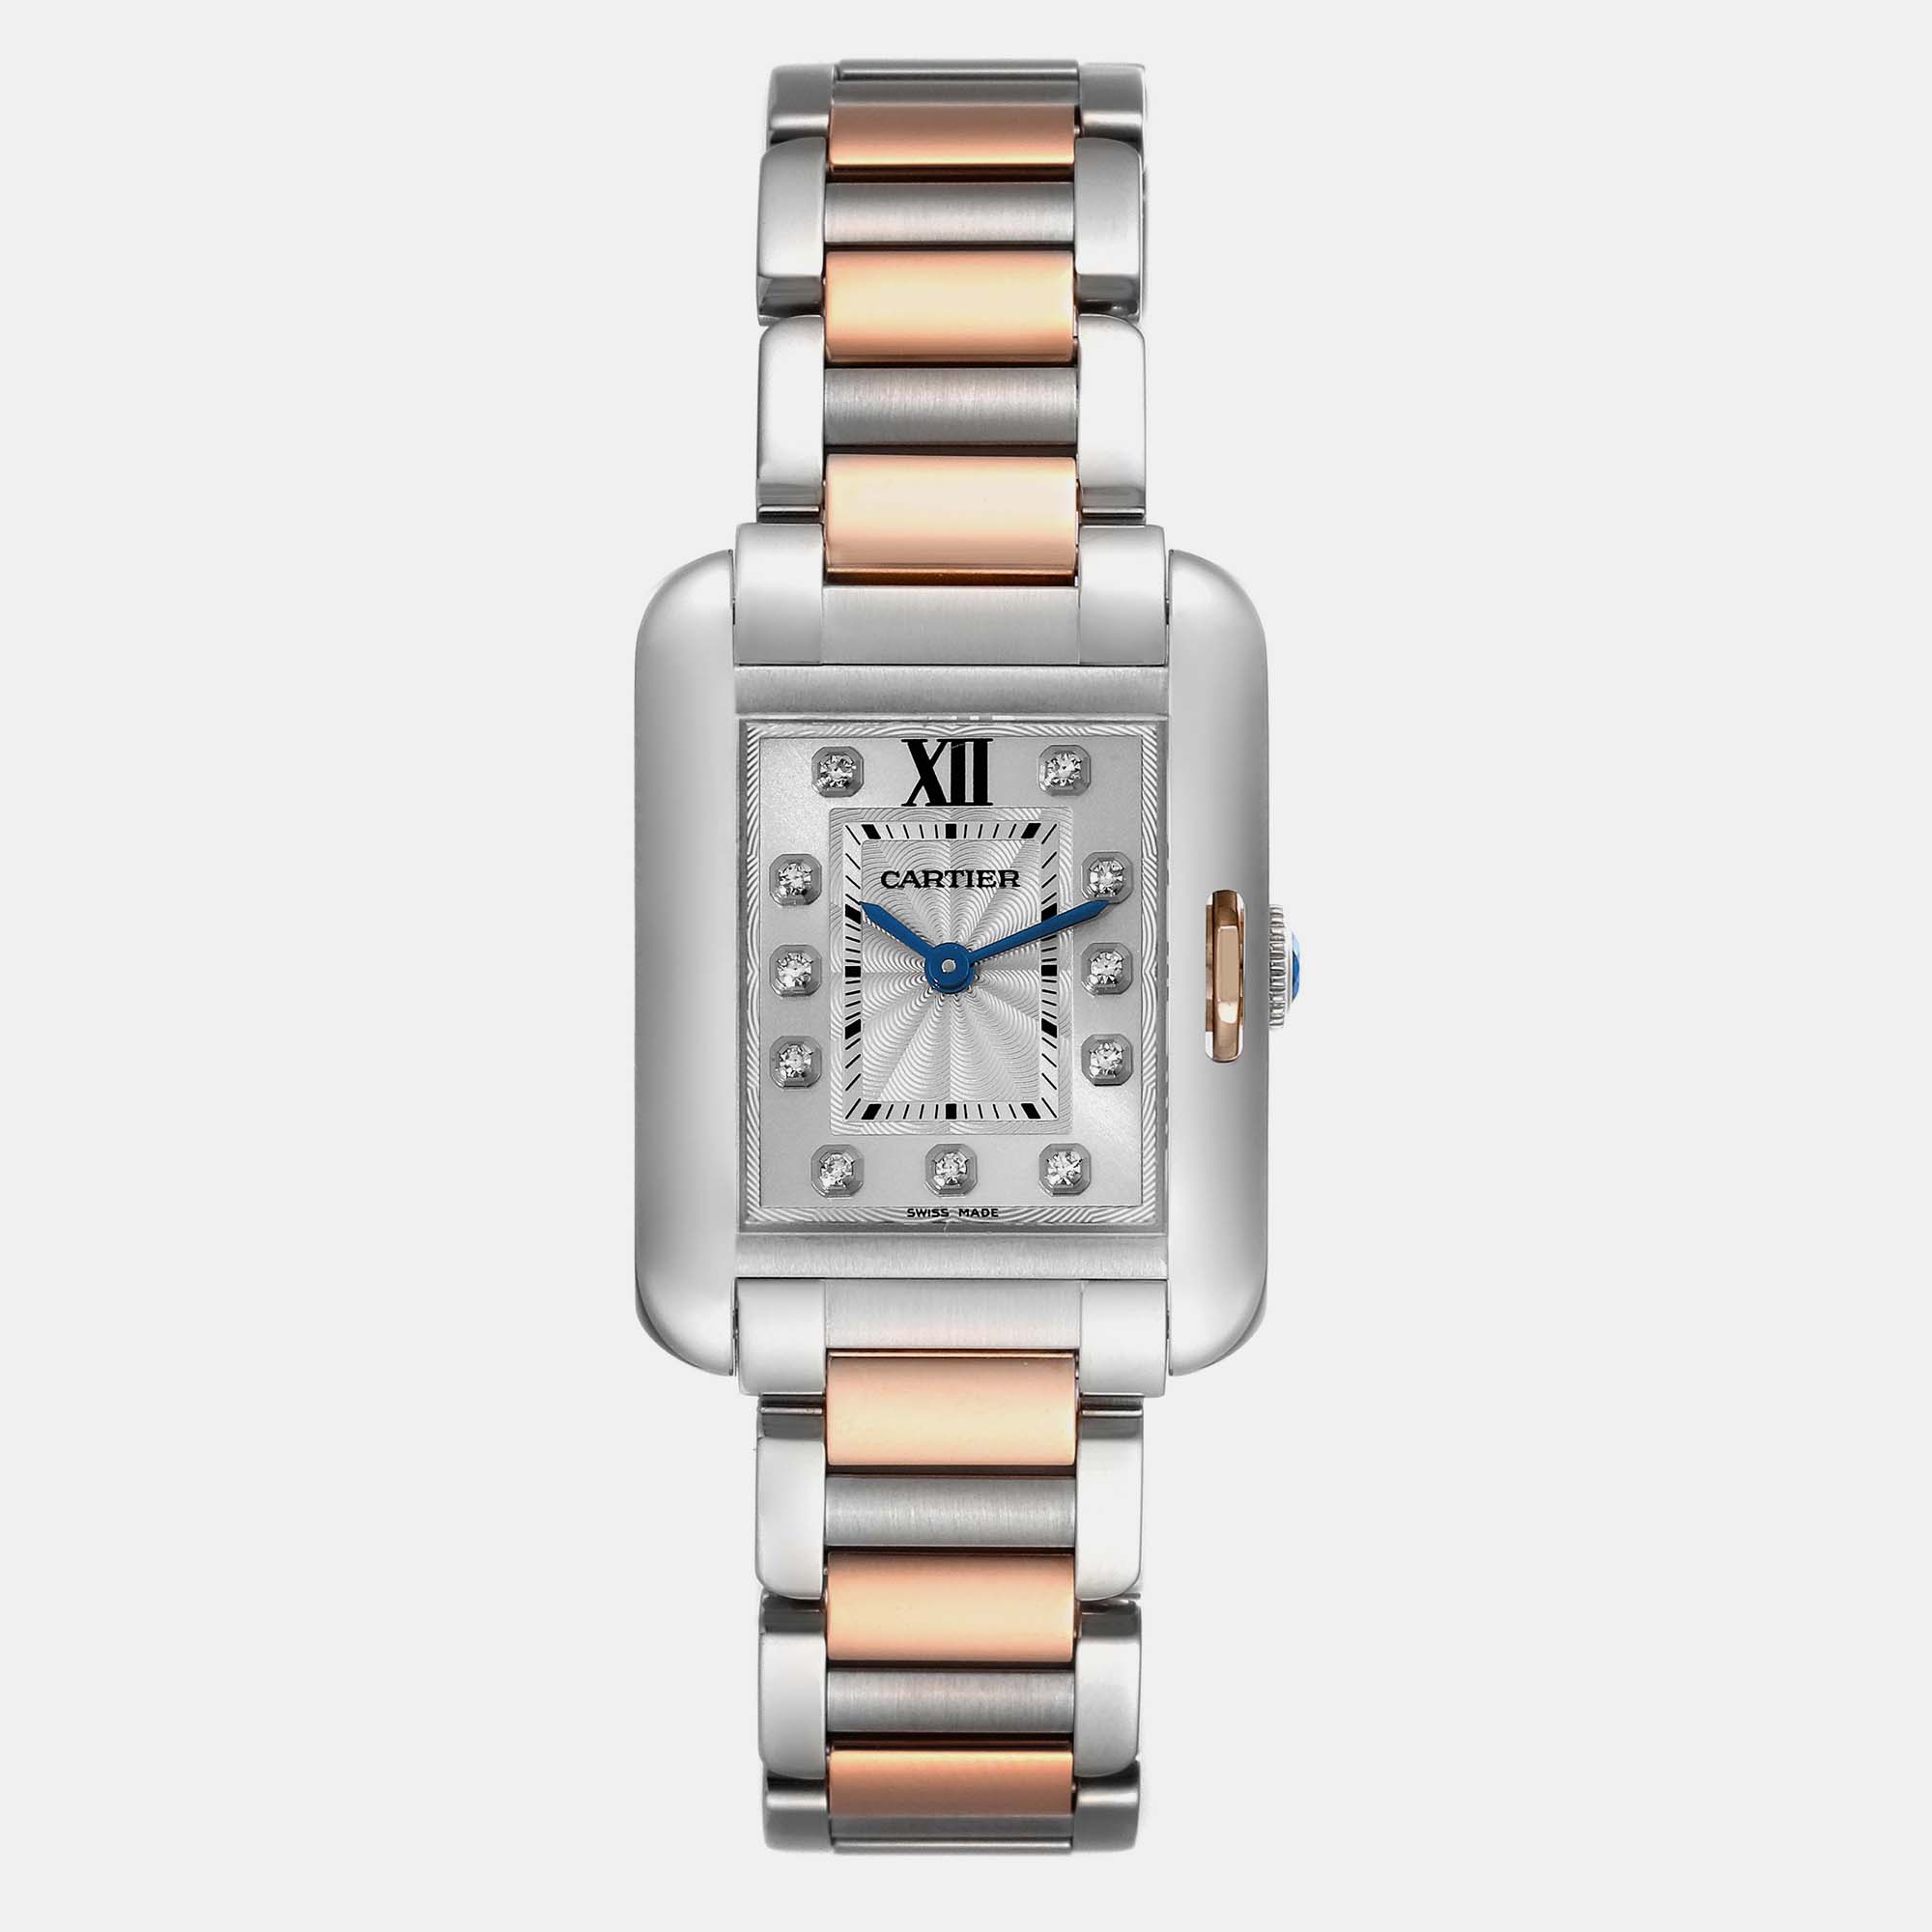 Cartier tank anglaise small steel rose gold diamond ladies watch wt100024 30.2 mm x 22.7 mm